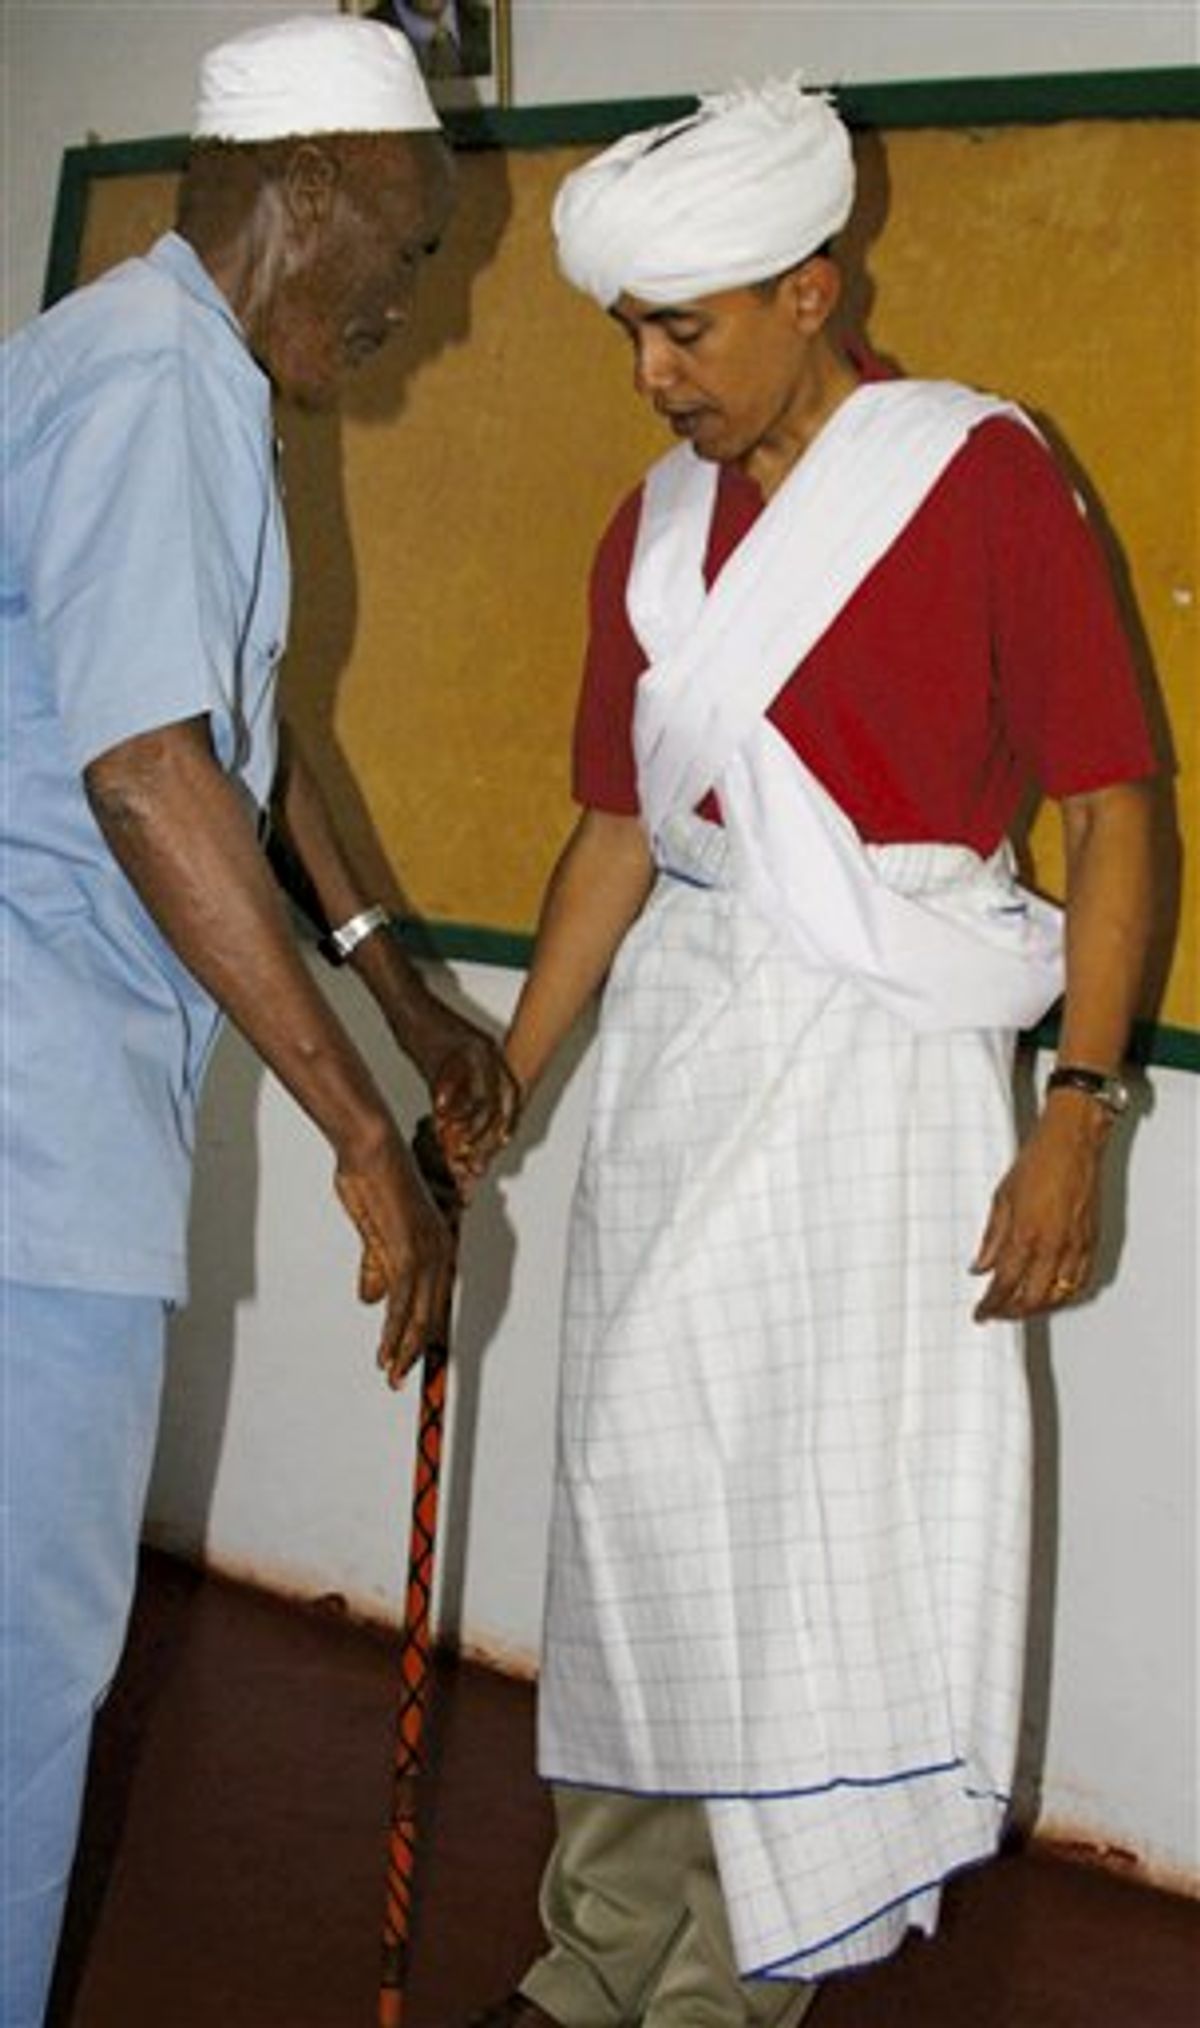 FILE  - In this 2006 file photo, then-Sen. Barack Obama, D-Ill., right, is dressed as a Somali Elder by Sheikh Mahmed Hassan, left, during his visit to Wajir, a rural area in northeastern Kenya, near the borders with Somalia and Ethiopia.  All presidents deal with image problems _ that they're too weak or too belligerent, too far left or far right. But Obama also faces questions over documented facts. Nearly one in five people, or 18 percent, said they think Obama is Muslim, up from the 11 percent who said so in March 2009, according to a poll released Thursday, Aug. 19, 2010. The proportion who correctly say he is a Christian is down to just 34 percent. (AP Photo, File) (AP)